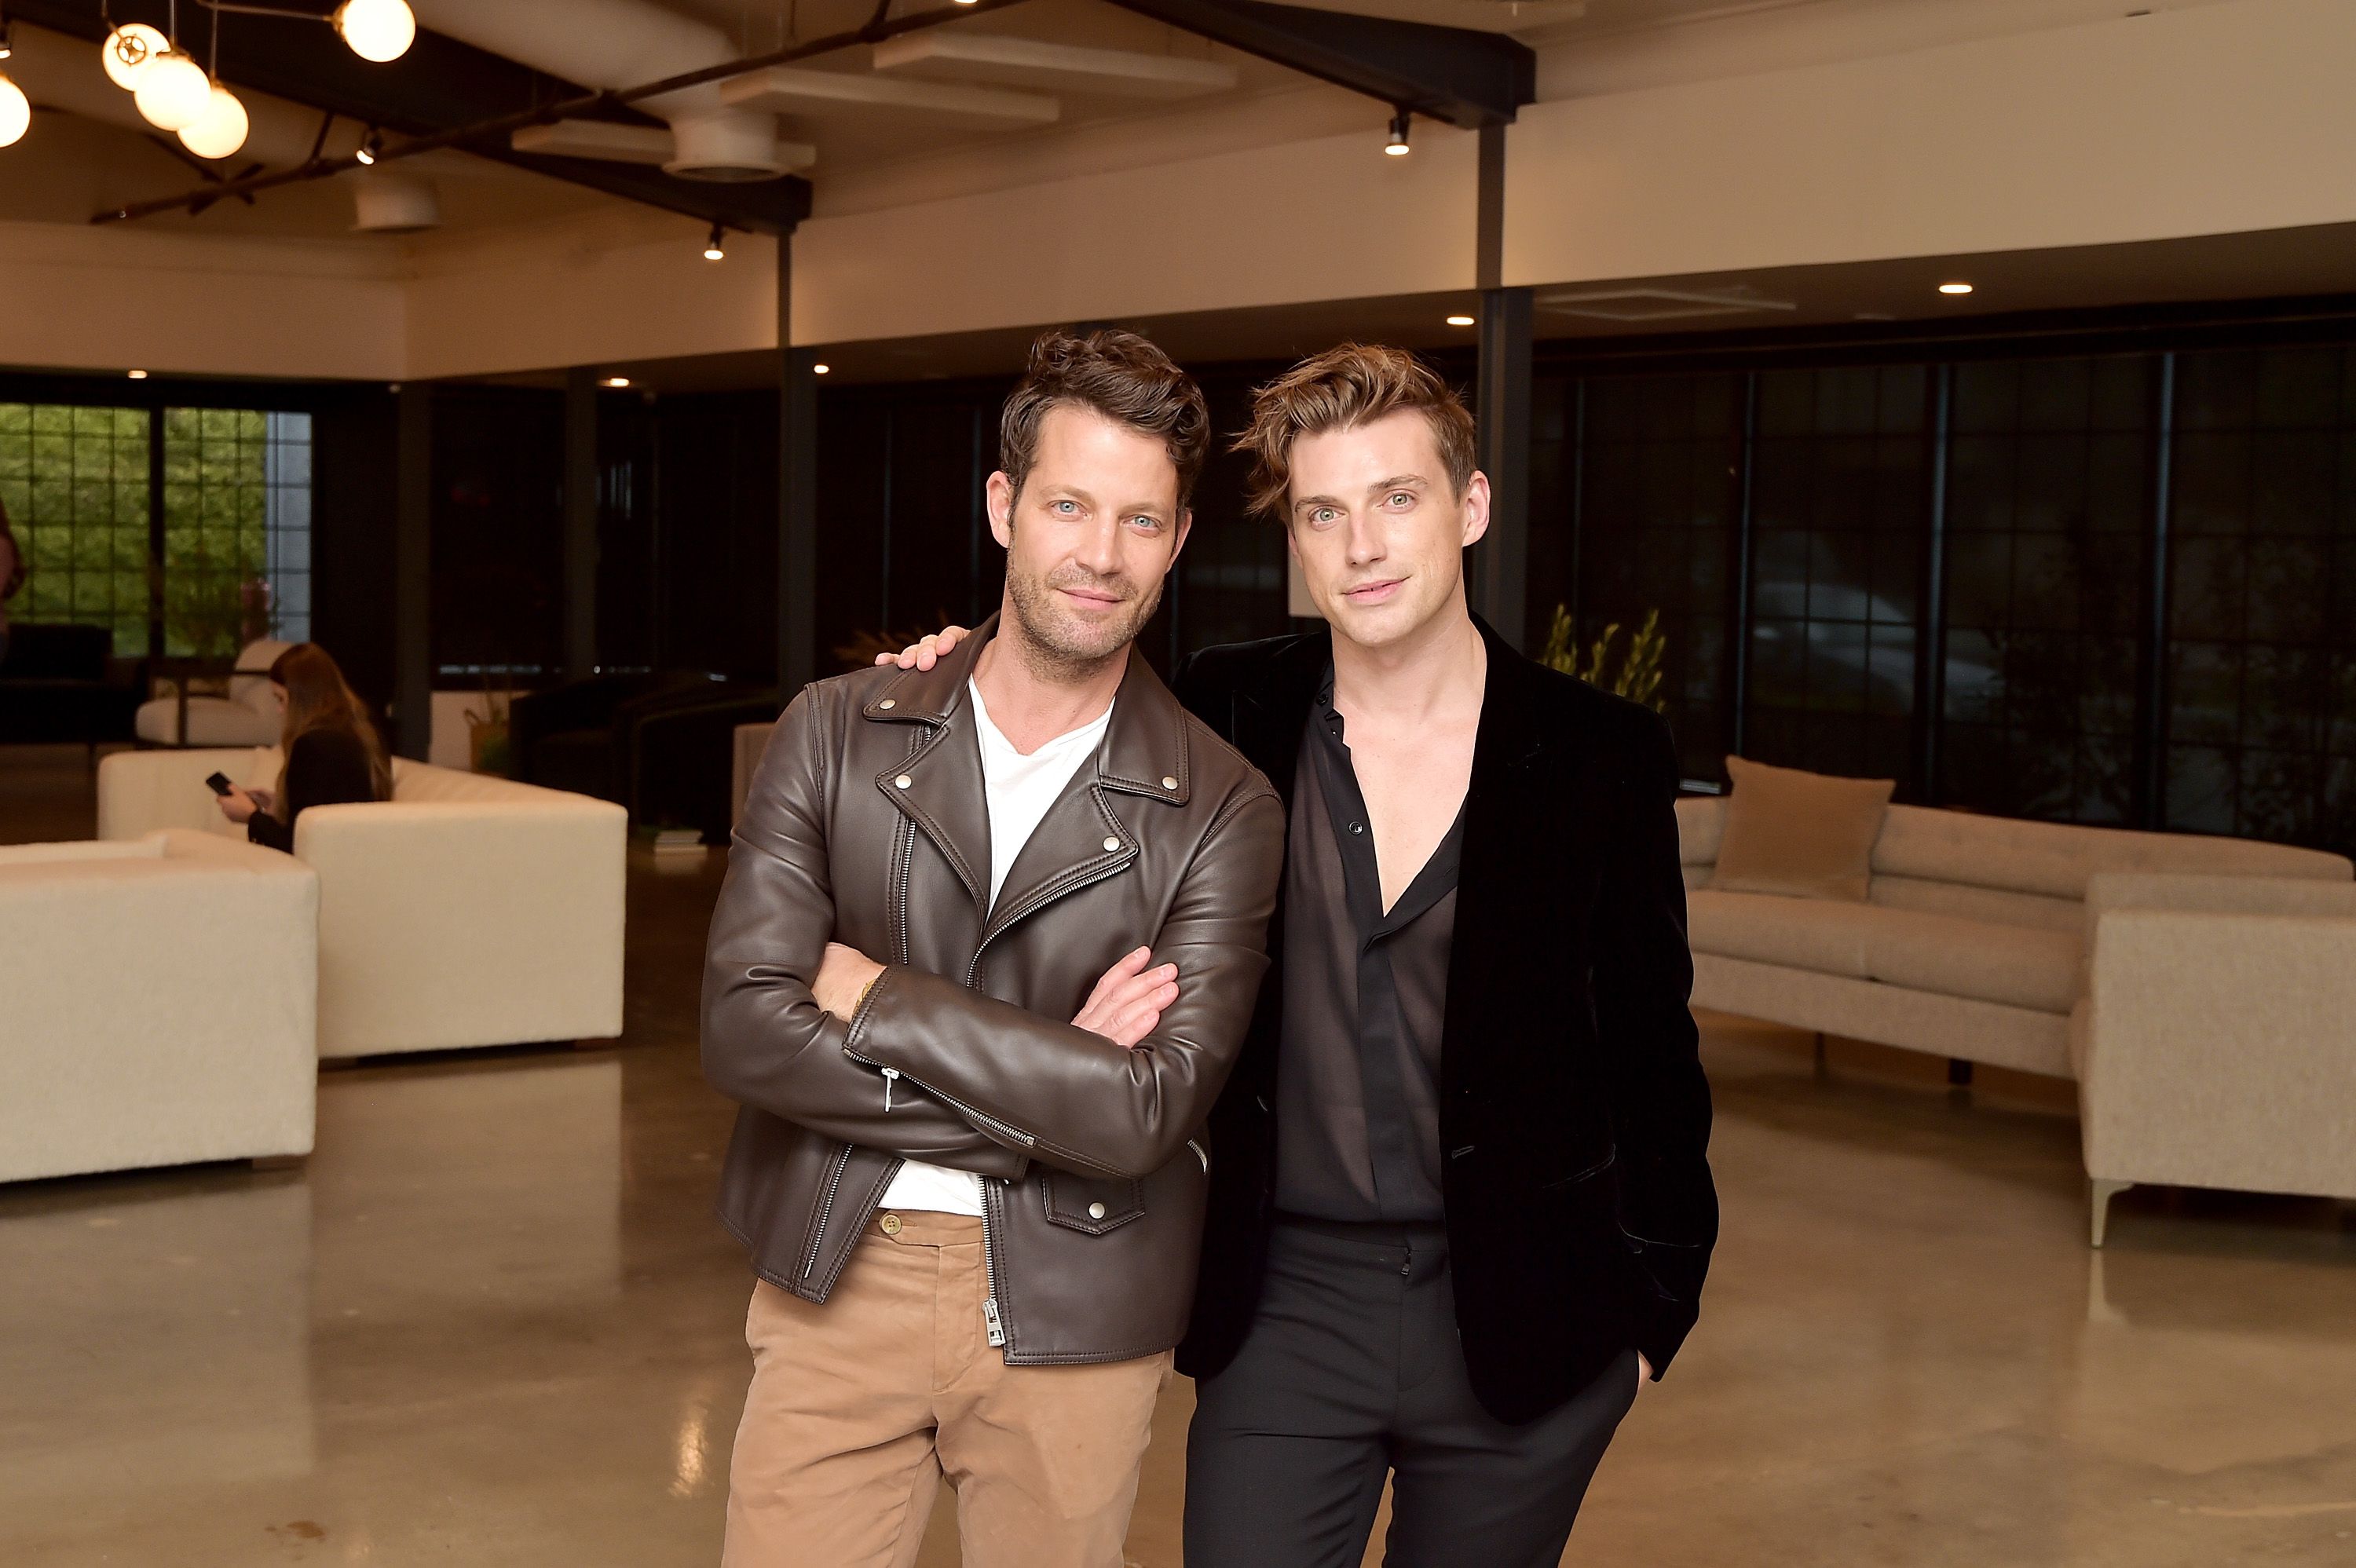 When it came to designing what Nate Berkus considered to be the perfec